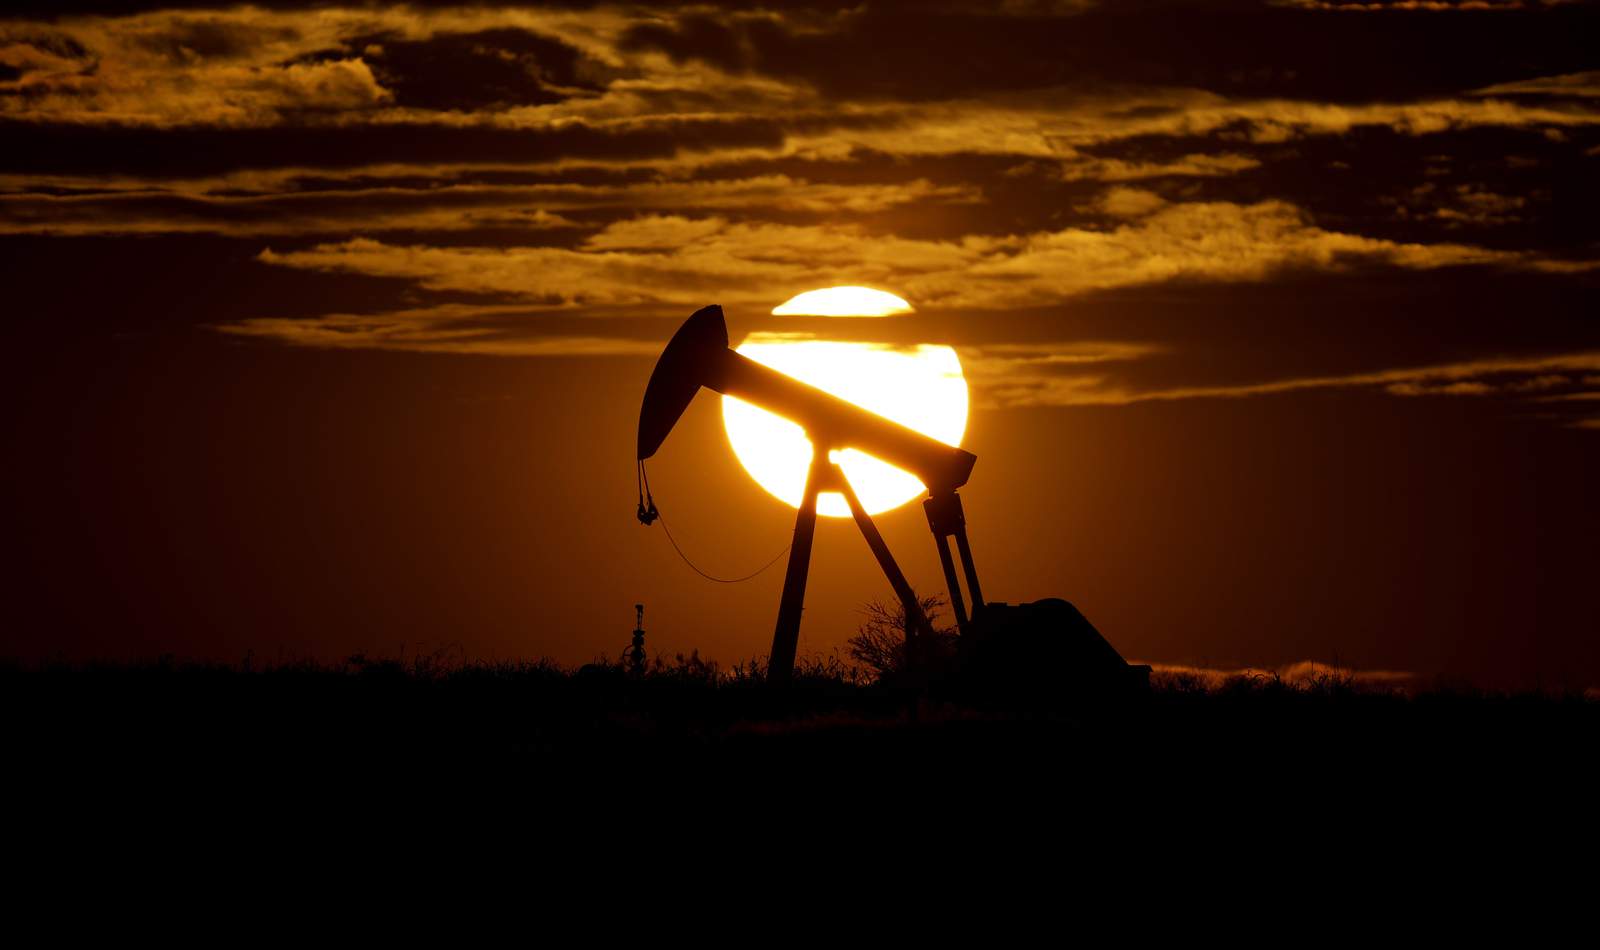 FILE - In this Wednesday, April 8, 2020, file photo, the sun sets behind an idle pump jack near Karnes City, Texas. Demand for oil continues to fall due to the new coronavirus outbreak. As demand for fuel plummeted worldwide and the oil industry faced a devastating drop in oil prices, the U.S. took the rare move of stepping into negotiations involving the member countries of OPEC and non-members such as Russia and Mexico. (AP Photo/Eric Gay, File)